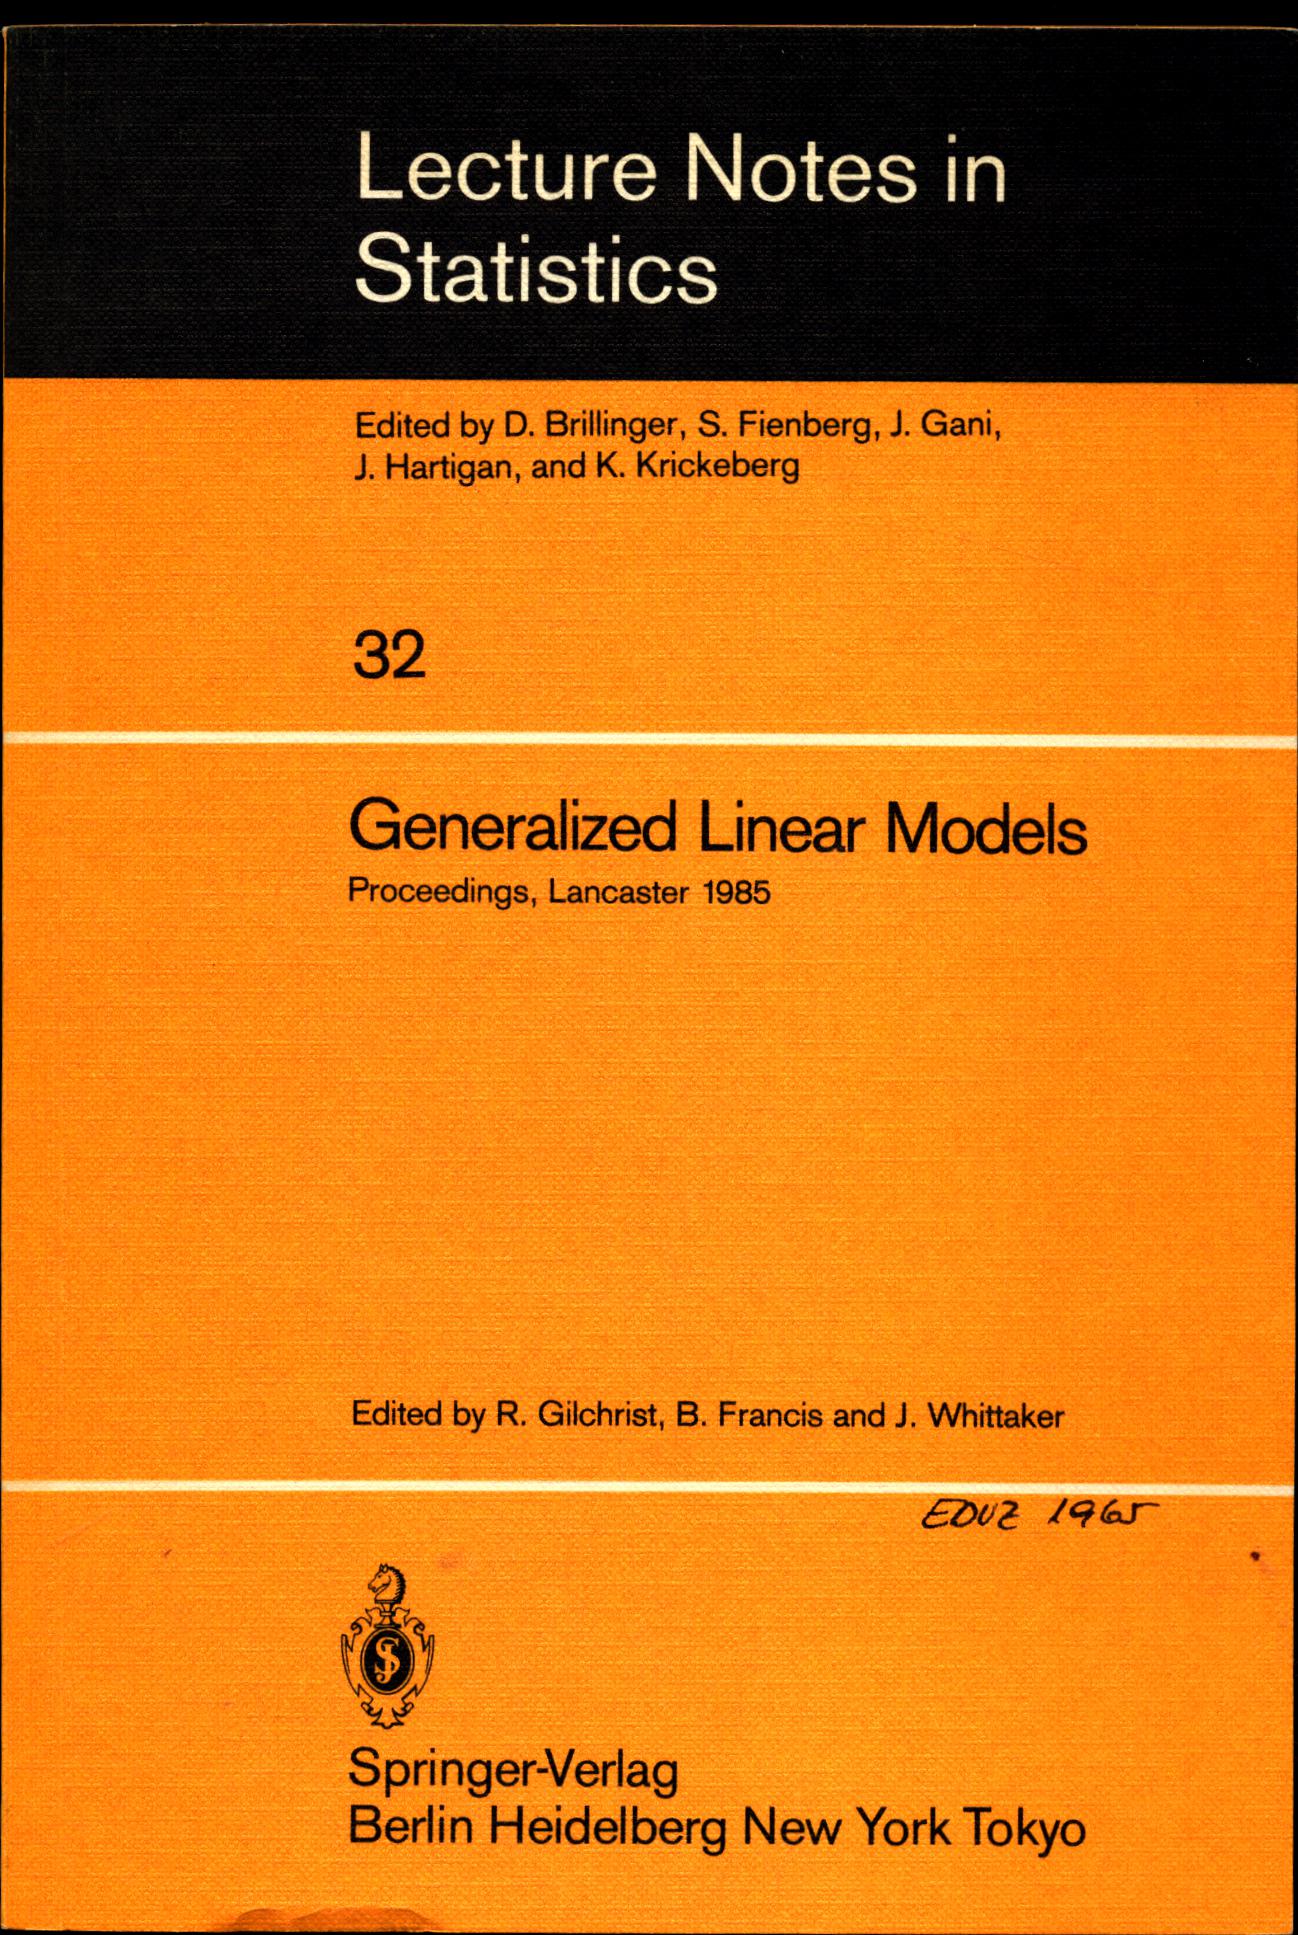 Generalized Linear Models Proceedings of the GLIM 85 Conference held at Lancaster, UK, September 16-19, 1985 Lecture Notes in Statistics ; Volume 32 - Gilchrist, Robert, Brian Francis  und Joe Whittaker